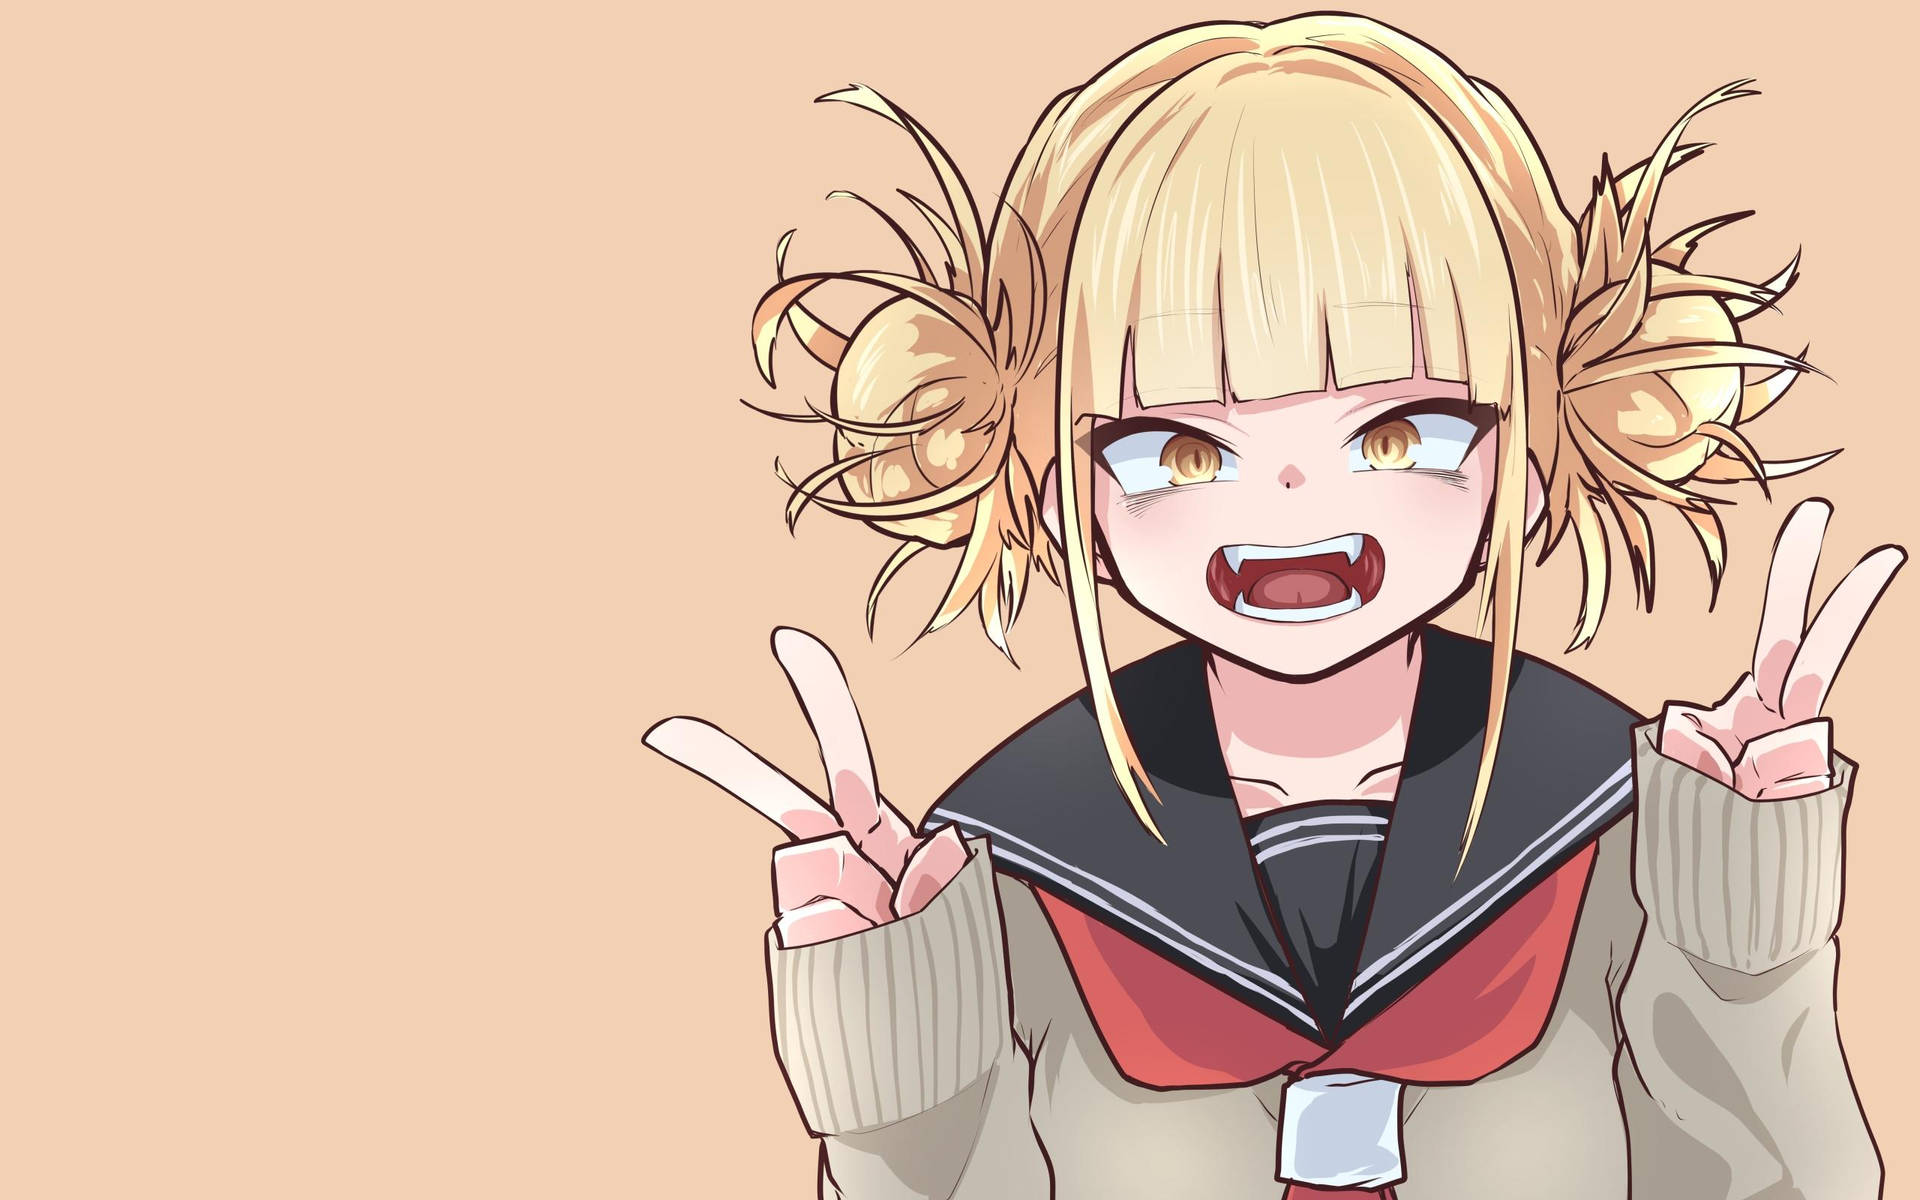 2560X1600 Himiko Toga Wallpaper and Background